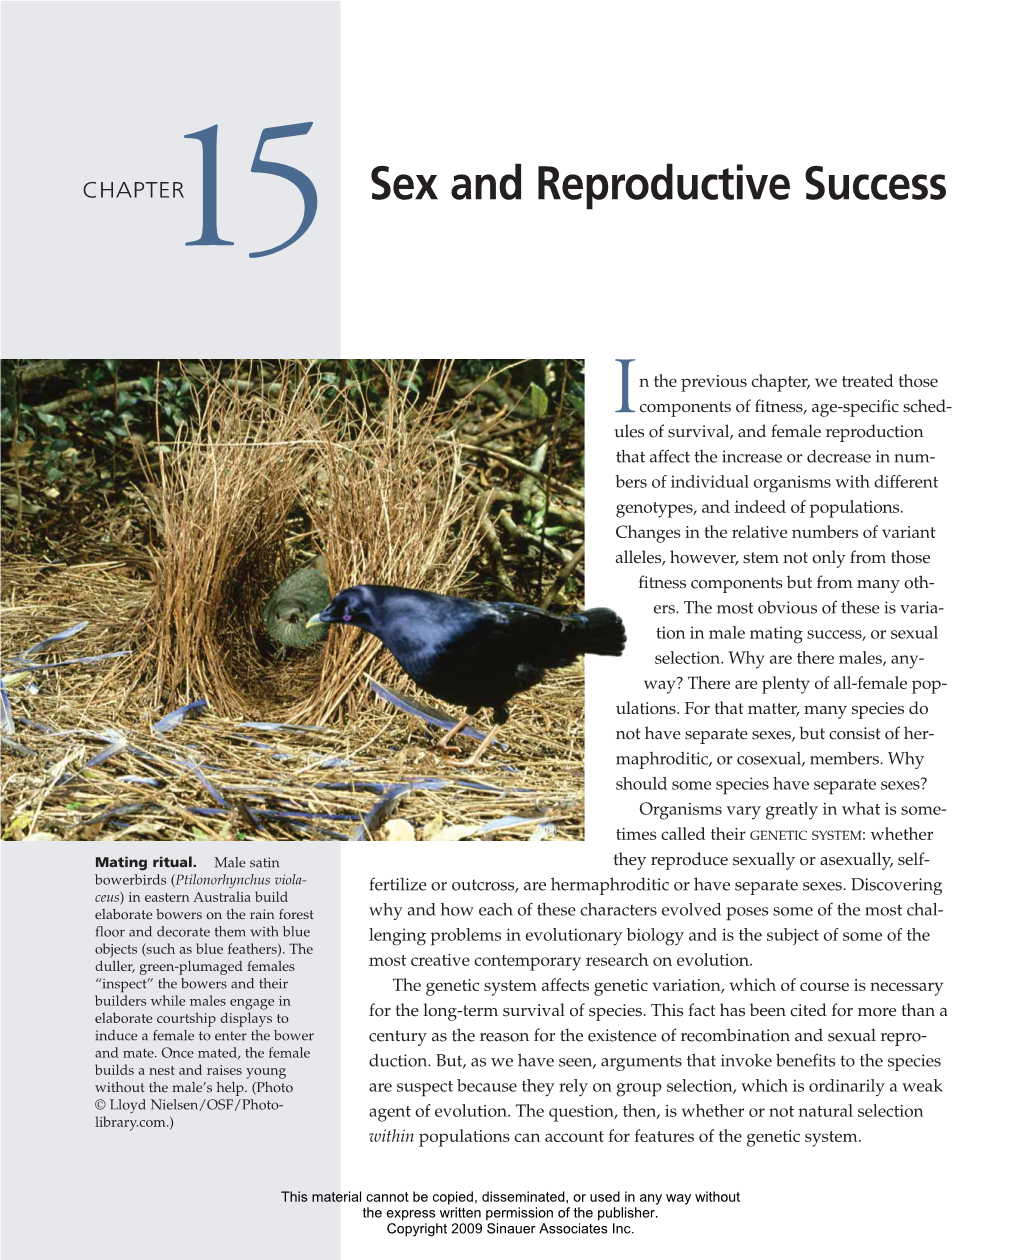 Sex and Reproductive Success